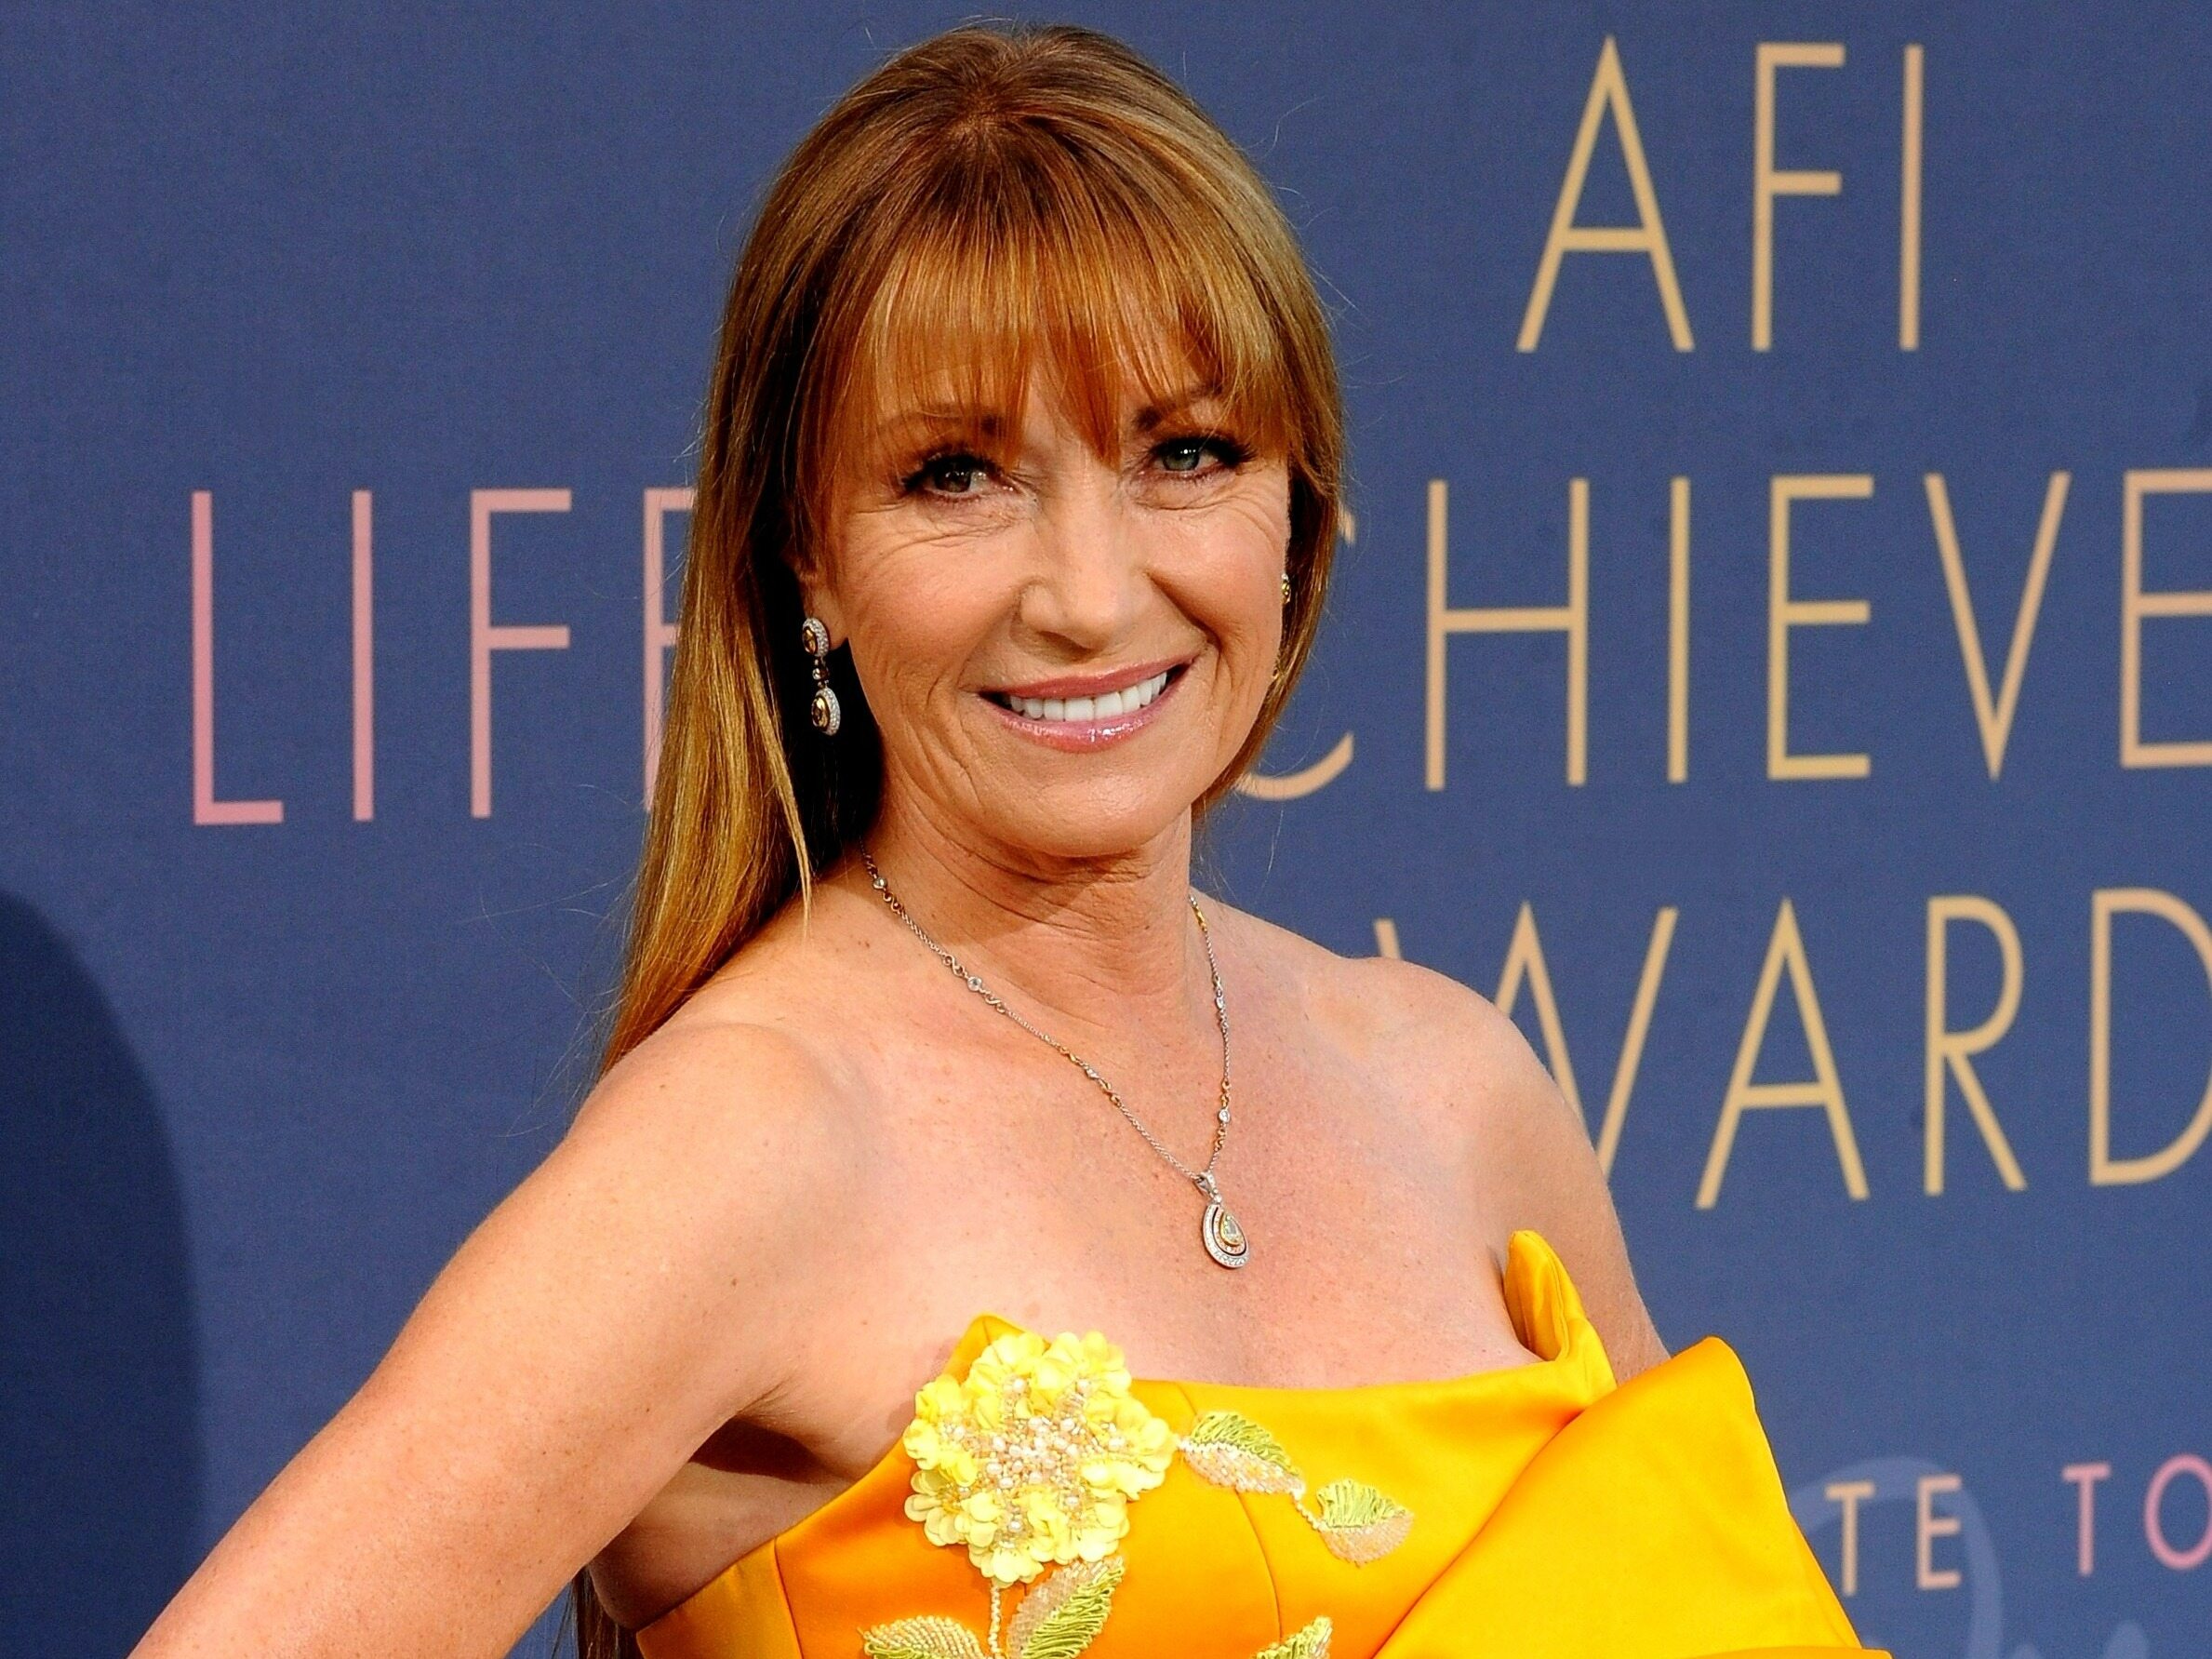 72-year-old Jane Seymour in a surprising confession.  "I'm having the most passionate sex of my life"